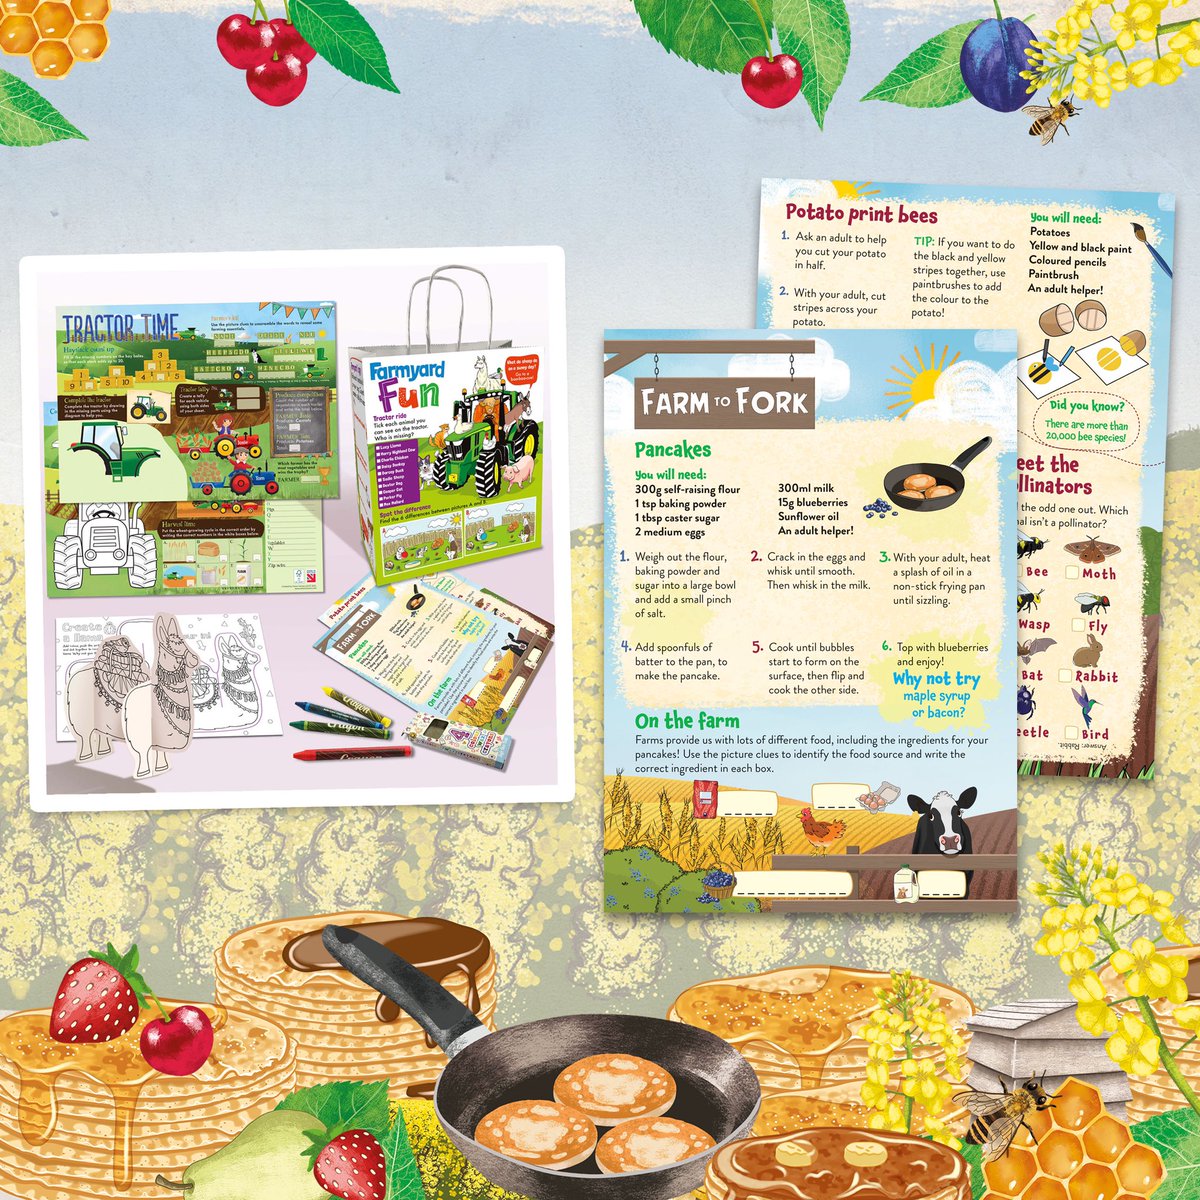 Our new craft card features a pancake recipe 🥞 with step by step instructions for children to make their own pancakes, available to buy now as part of our Farmyard Fun activity pack. All you need to choose your topping! 😋